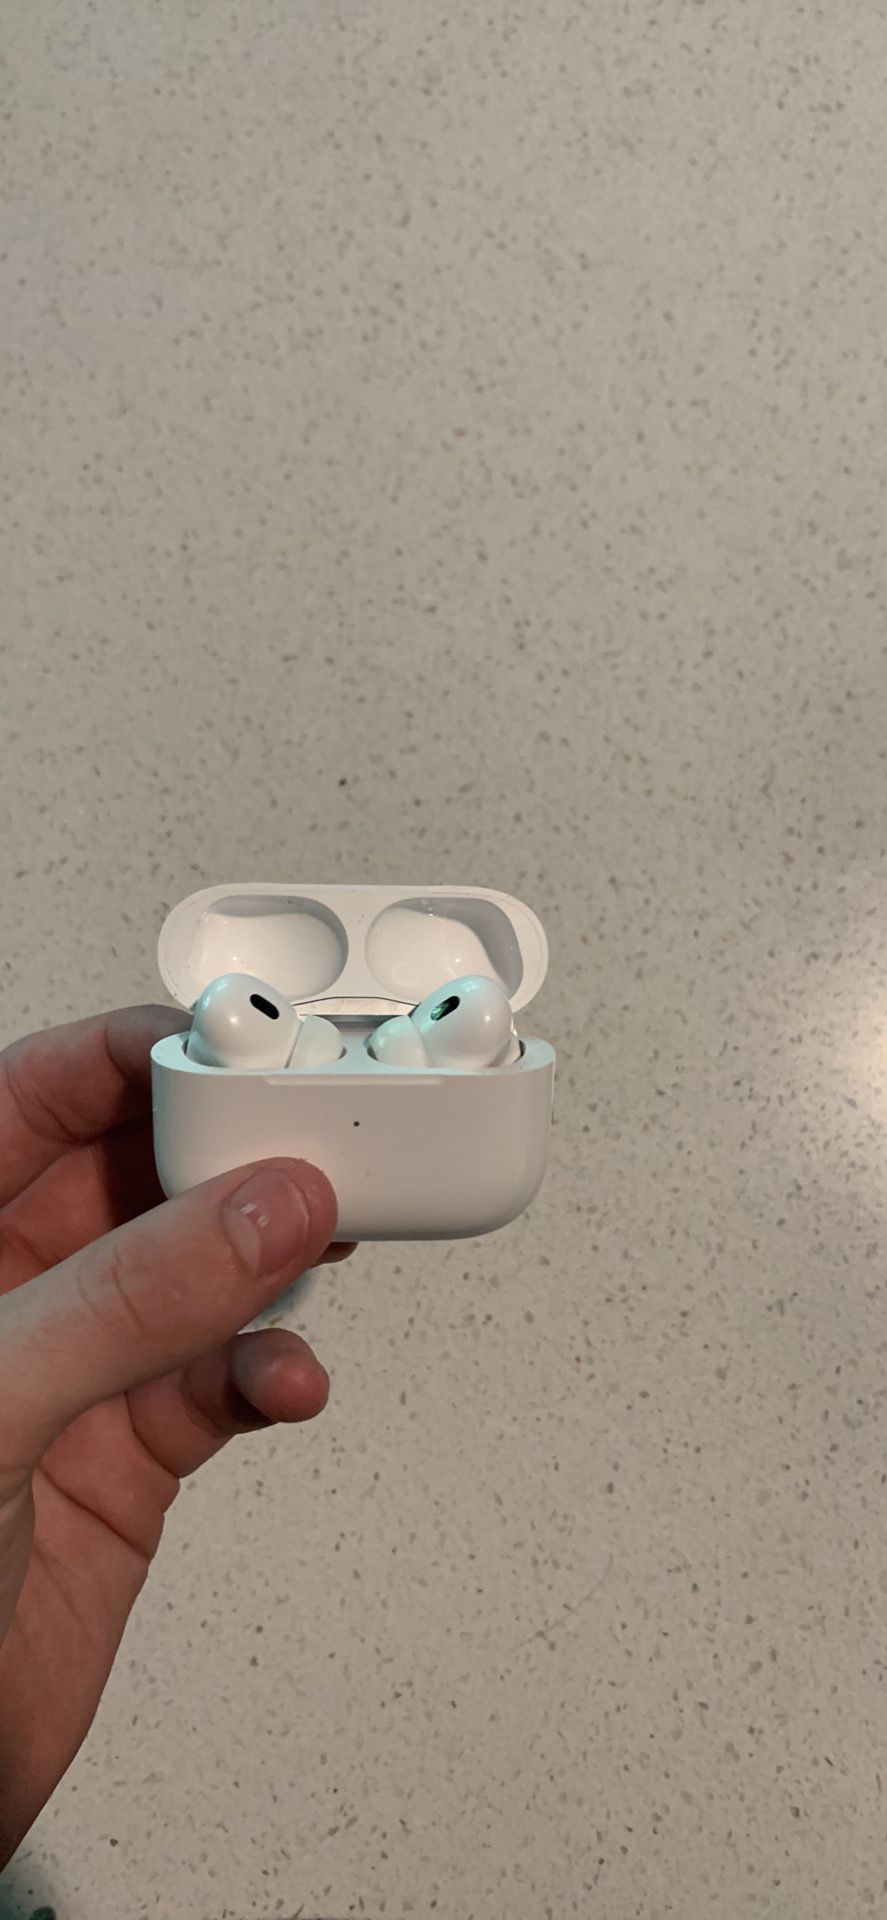 airpod pros 2nd generation